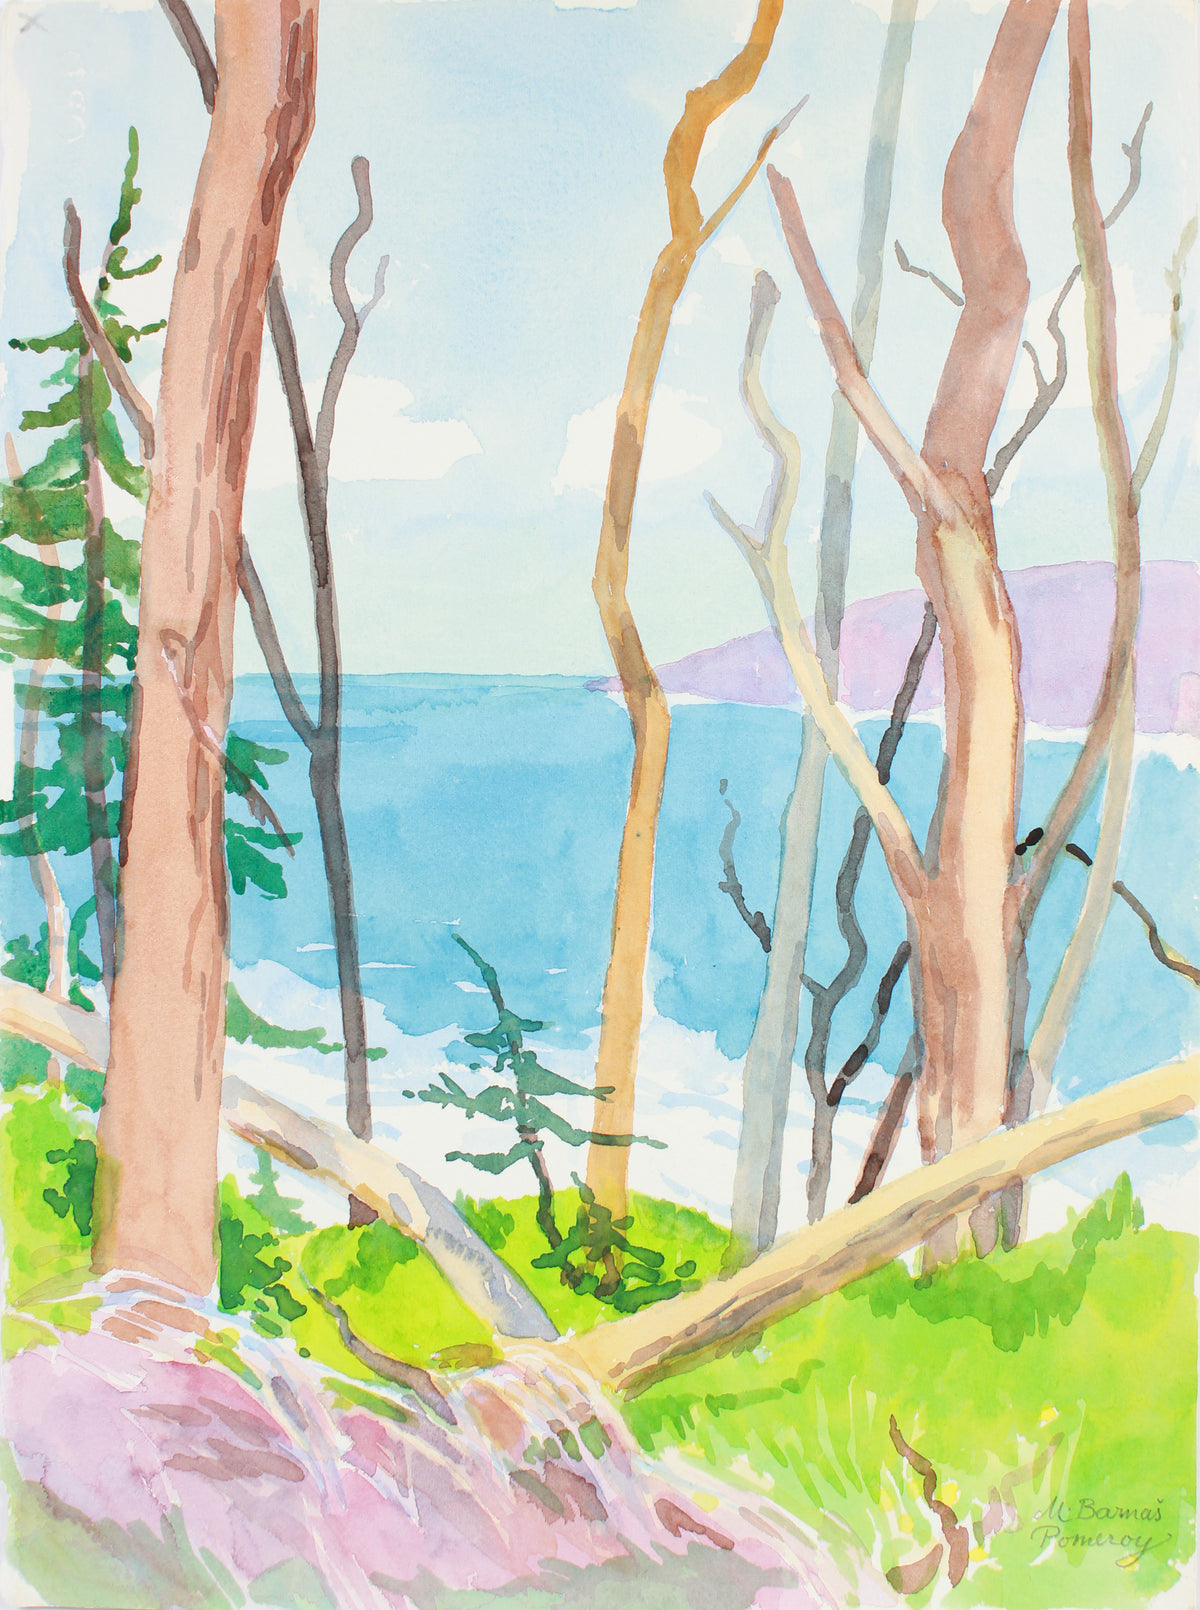 &lt;i&gt;View of Carmel Bay from near Great Dome&lt;/i&gt; &lt;br&gt;1999 Watercolor &lt;br&gt;&lt;br&gt;#A7387